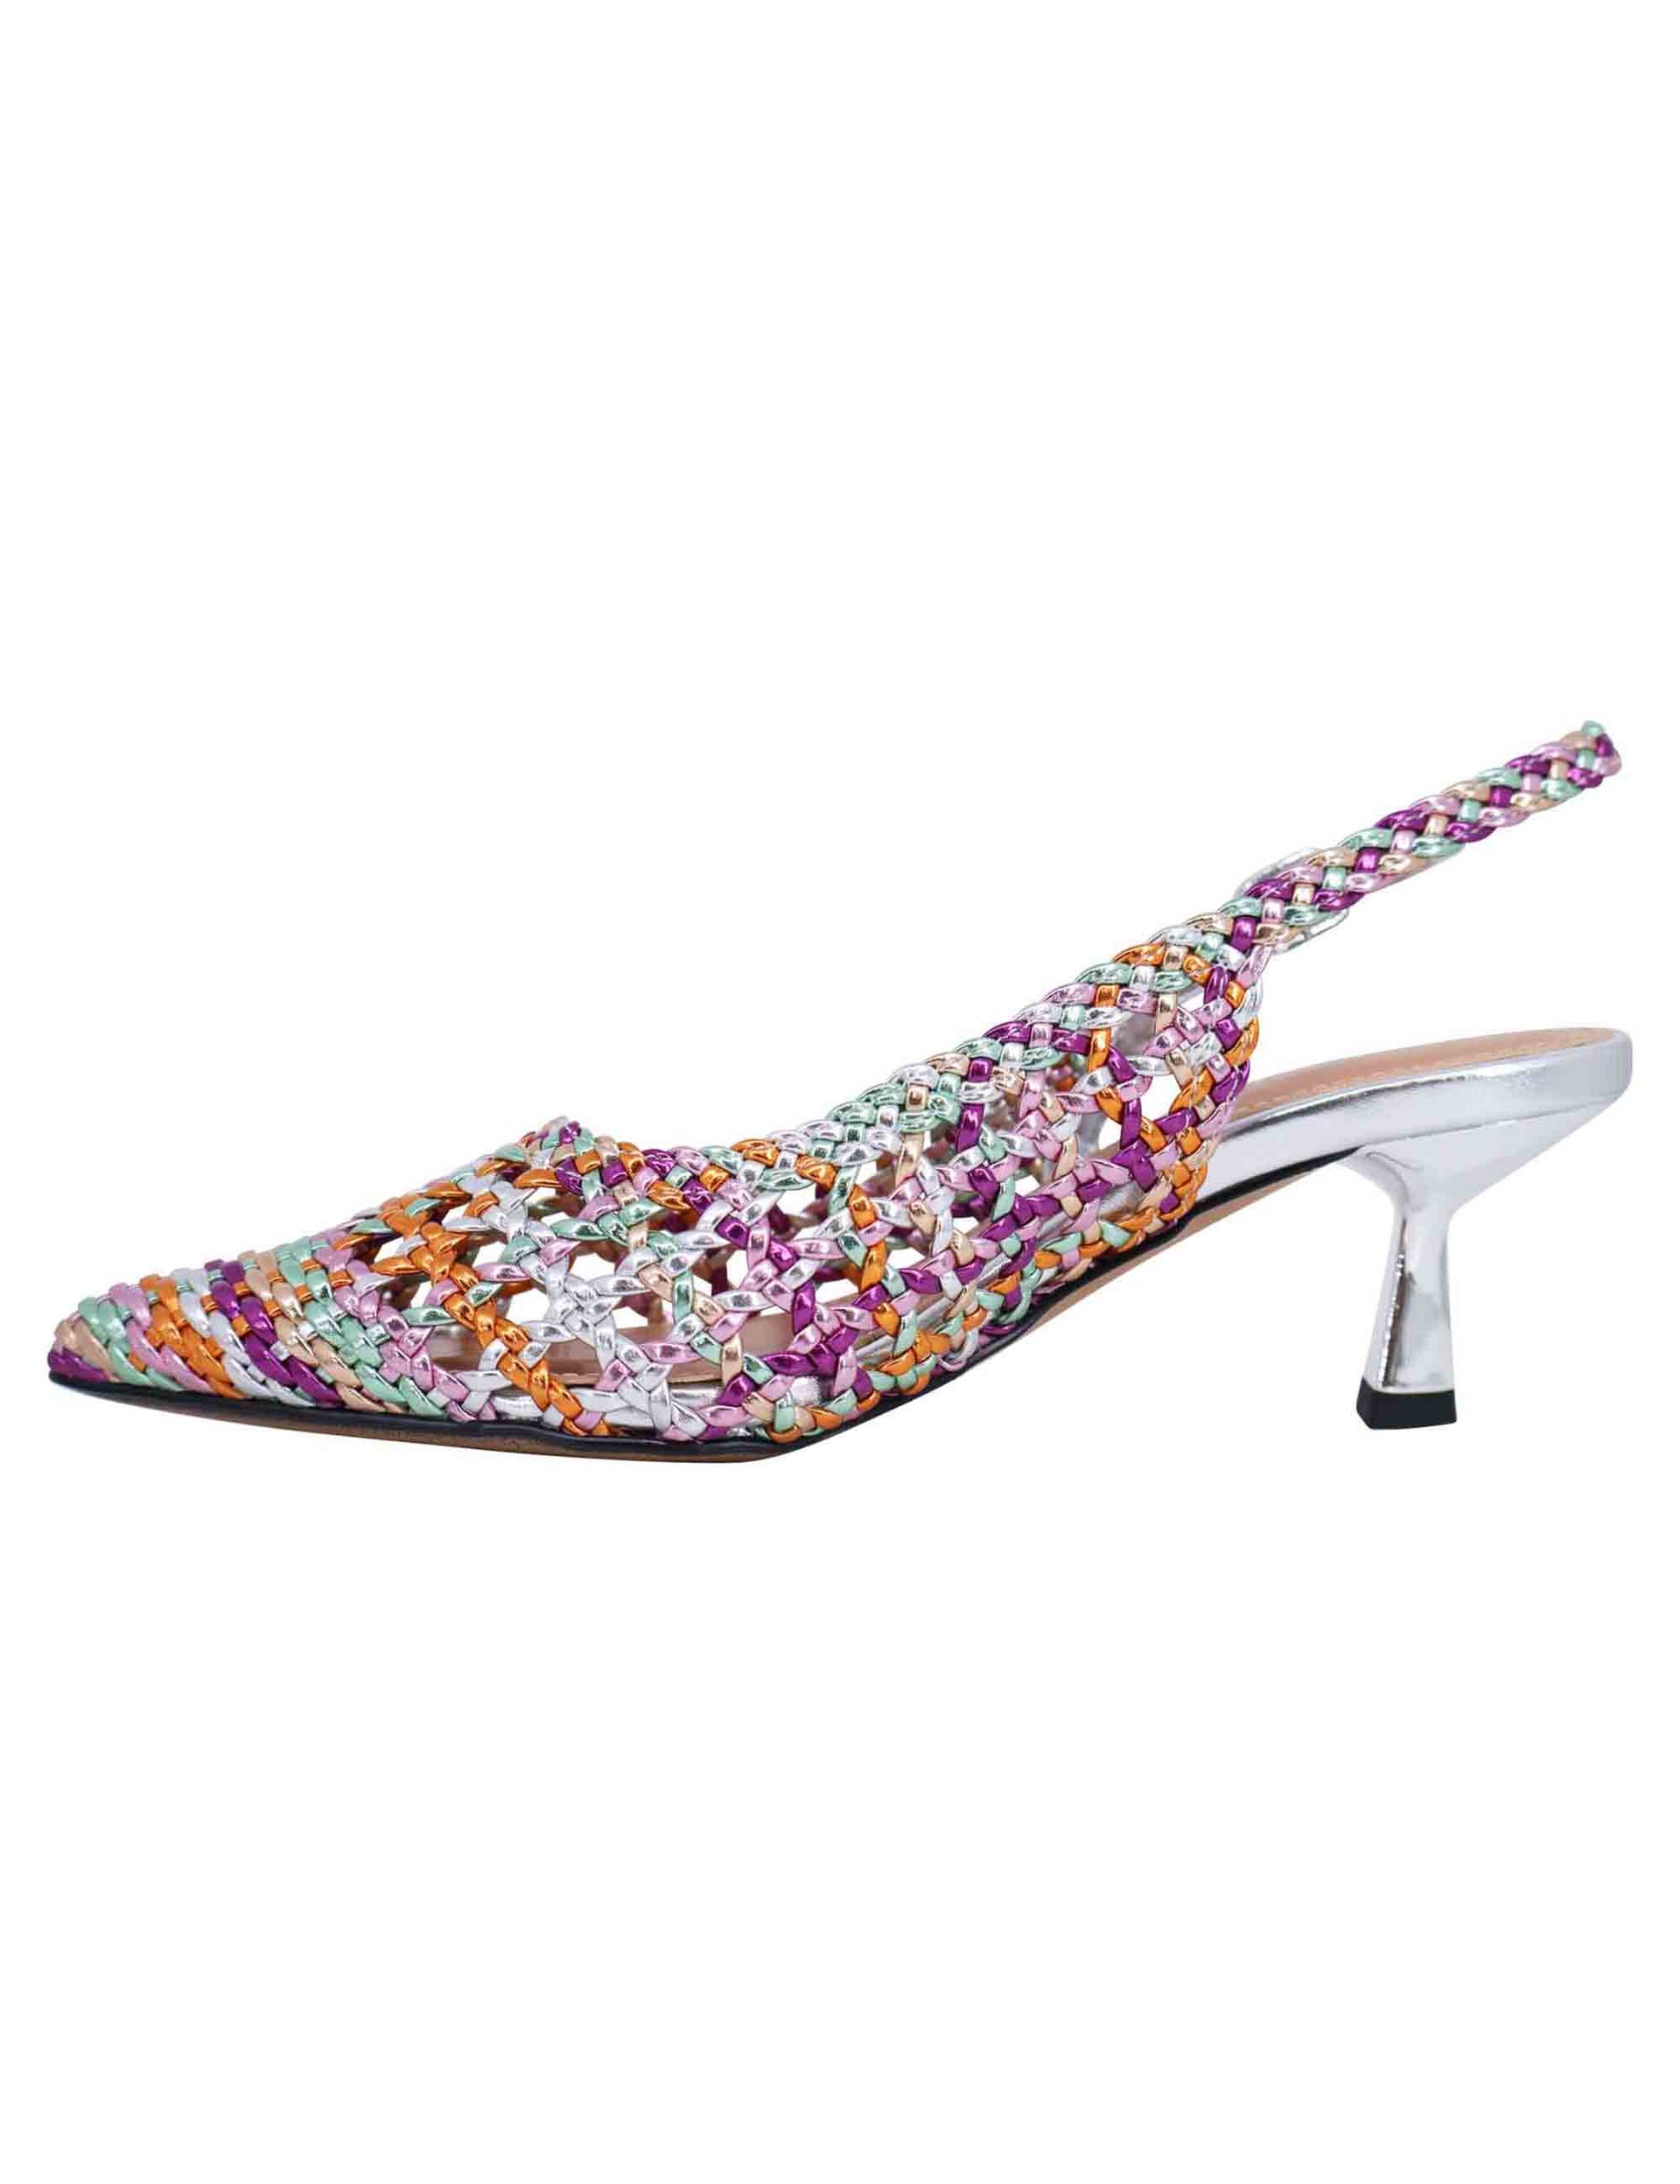 Women's slingback pumps in multicolored fuchsia laminated eco leather with silver heel